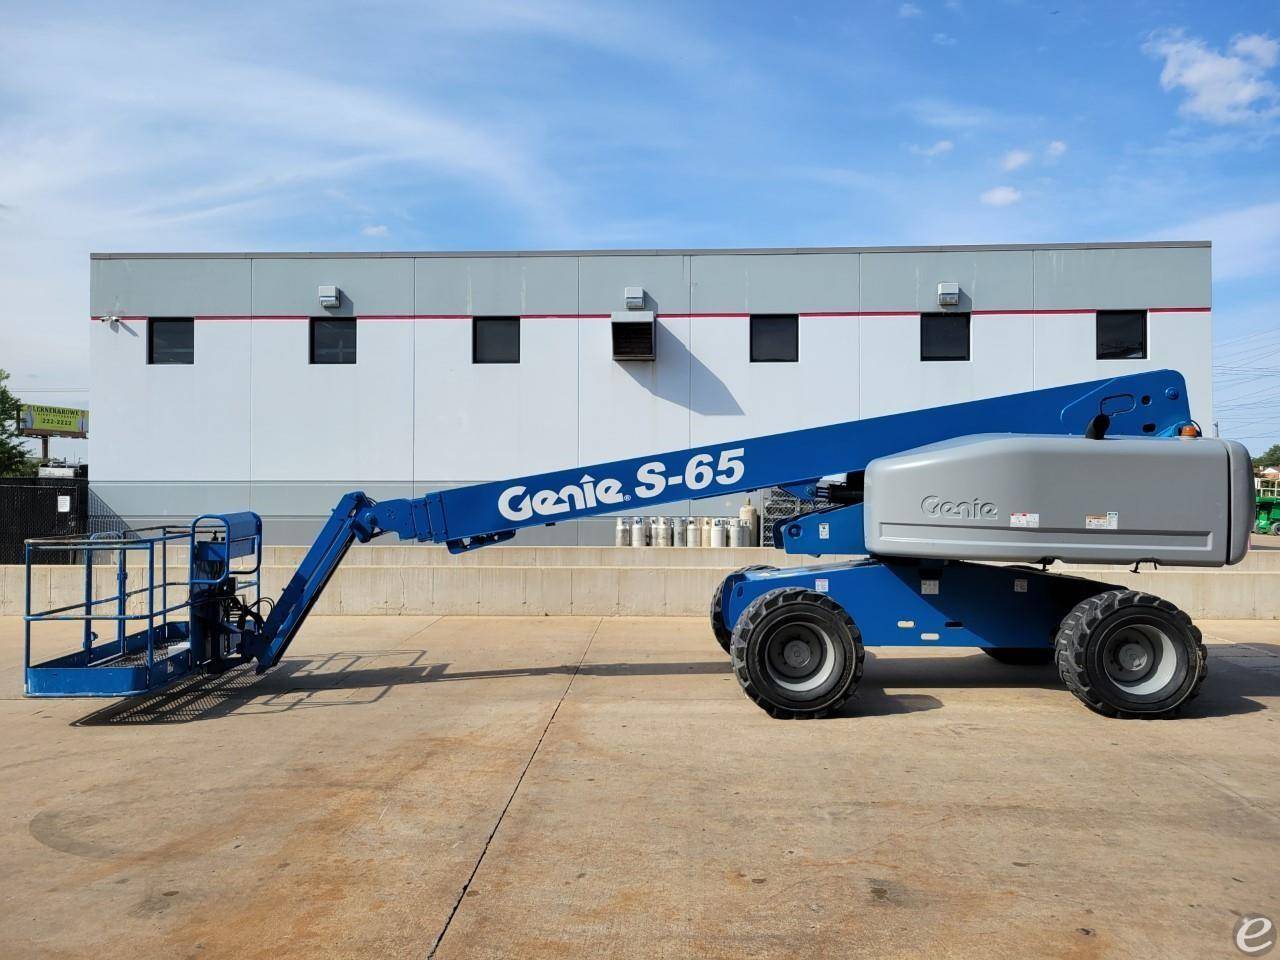 2011 Genie S65 Articulated Boom Boom Lift - 123Forklift